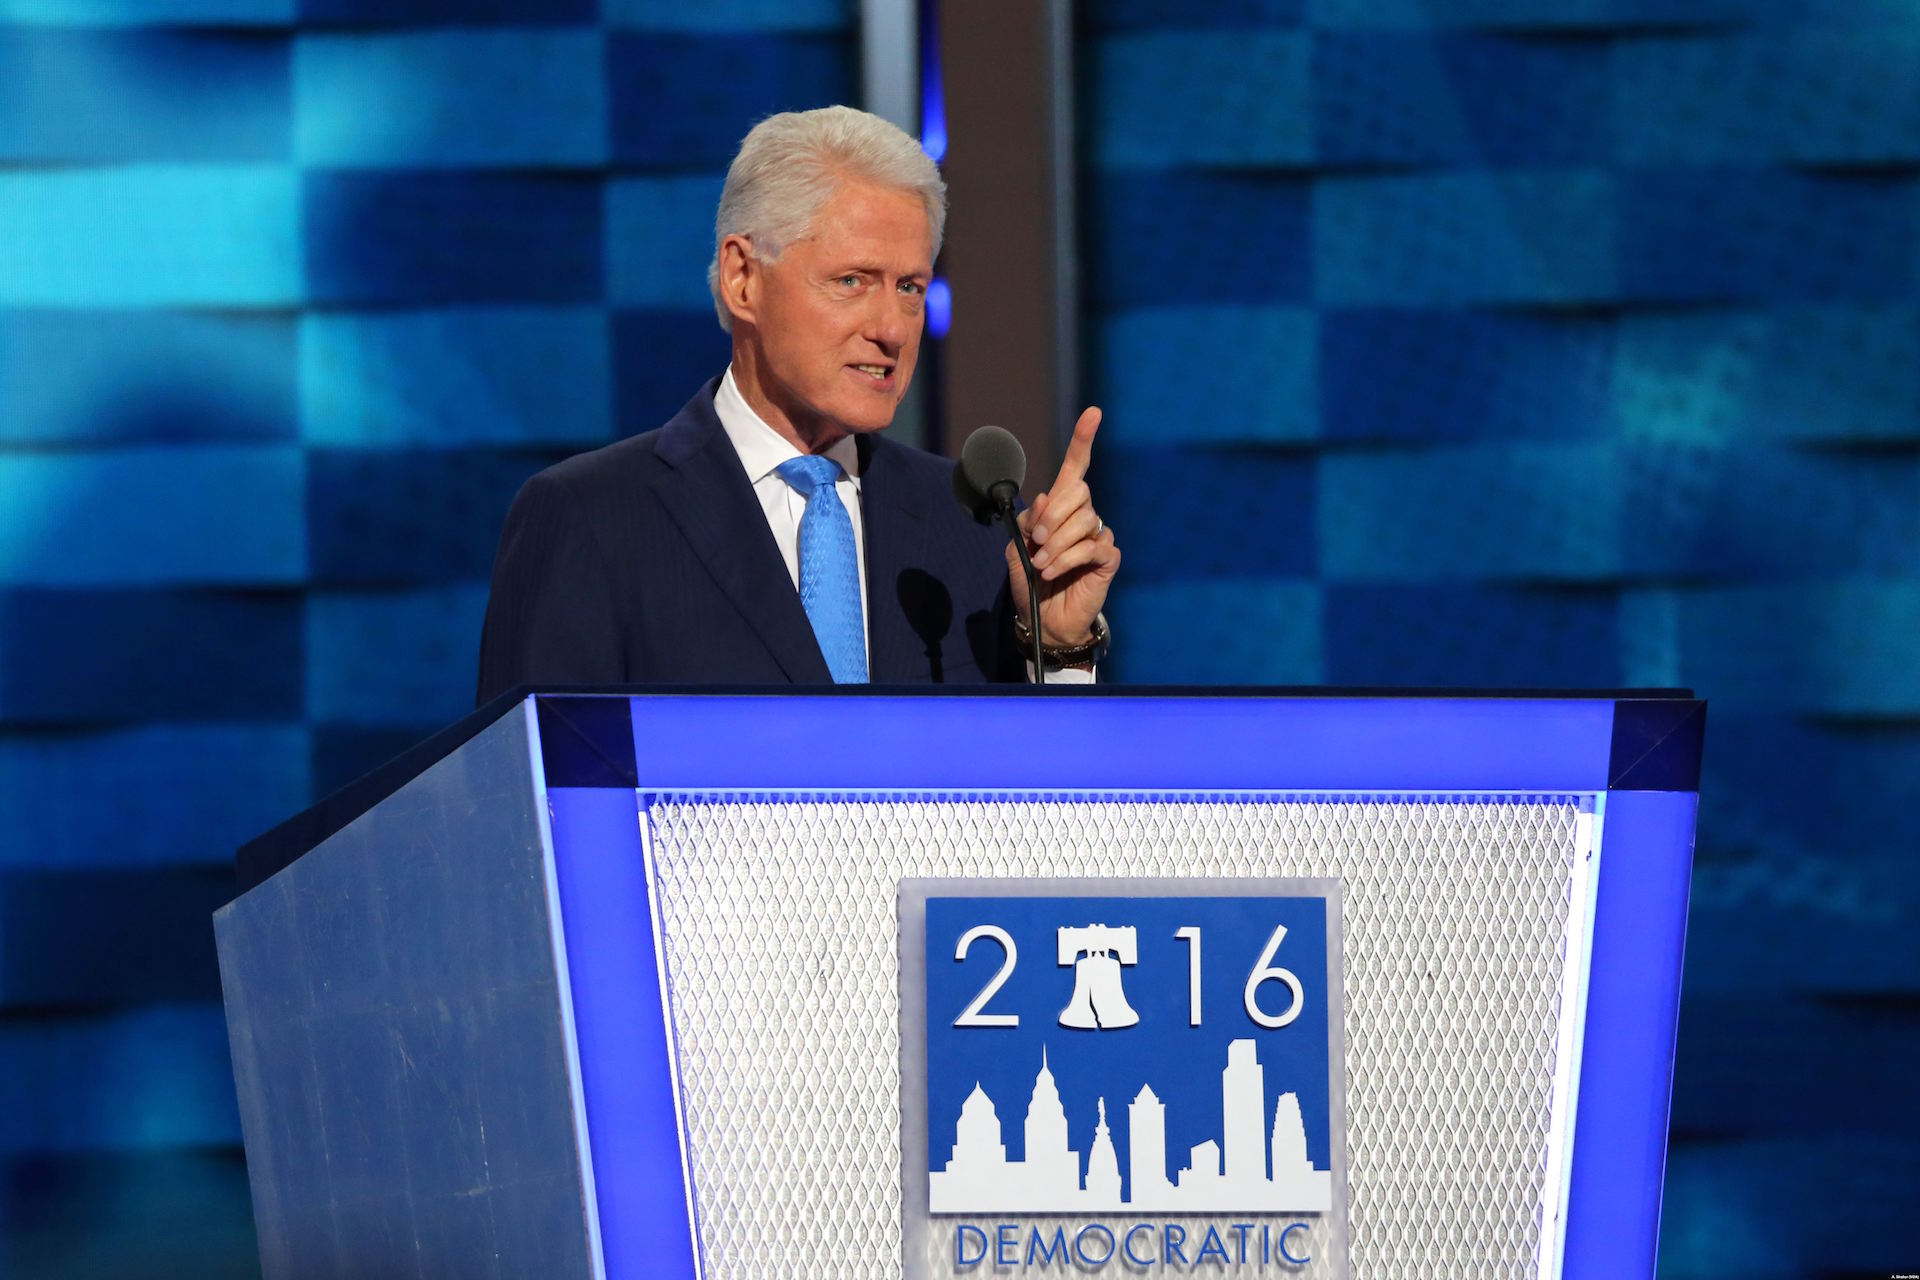 Rumors swirl about impending video release of Bill Clinton, government officials with minors